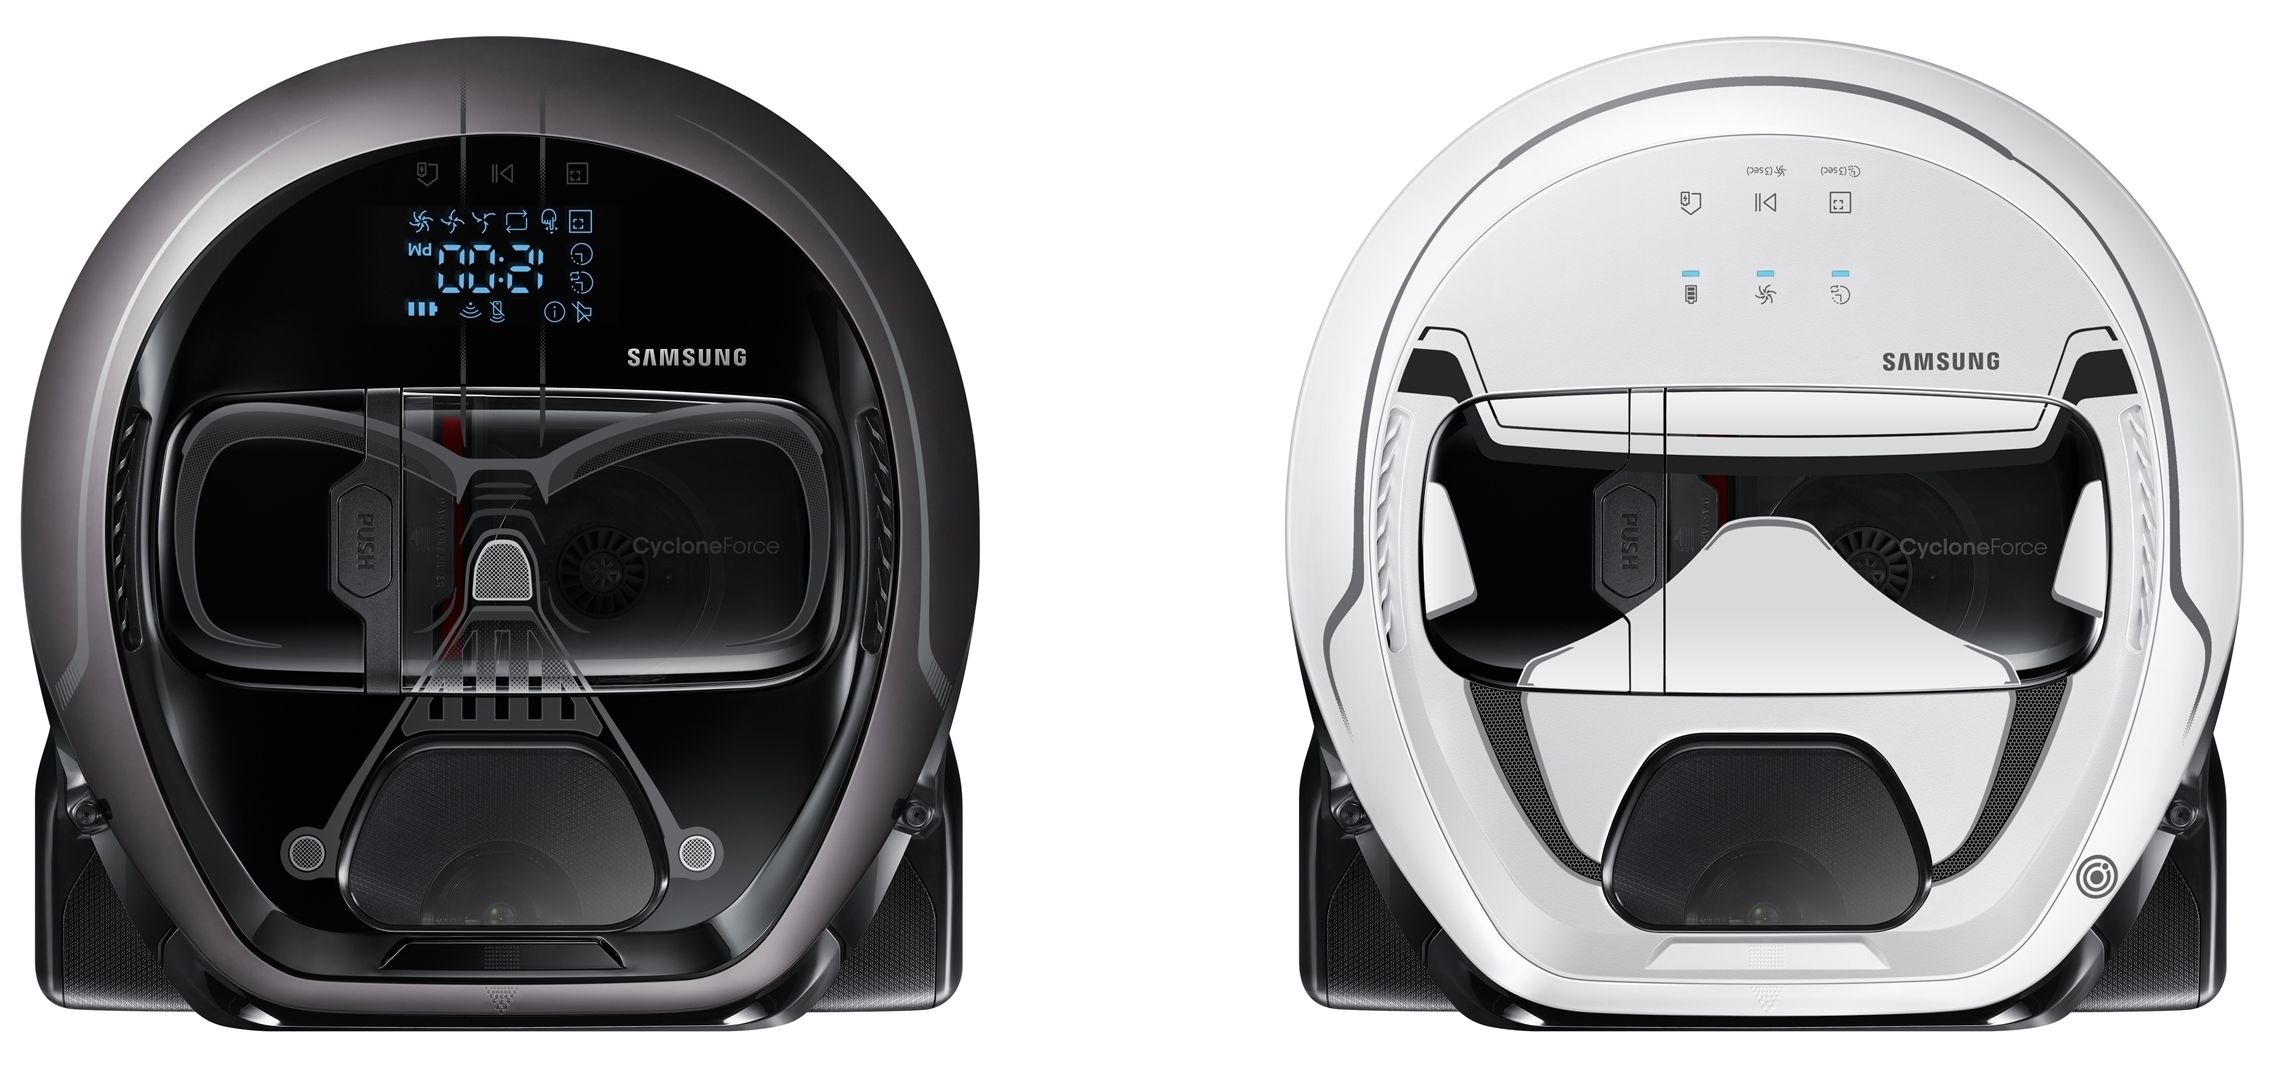 Samsung will release smart vacuum cleaner in the style of Star Wars